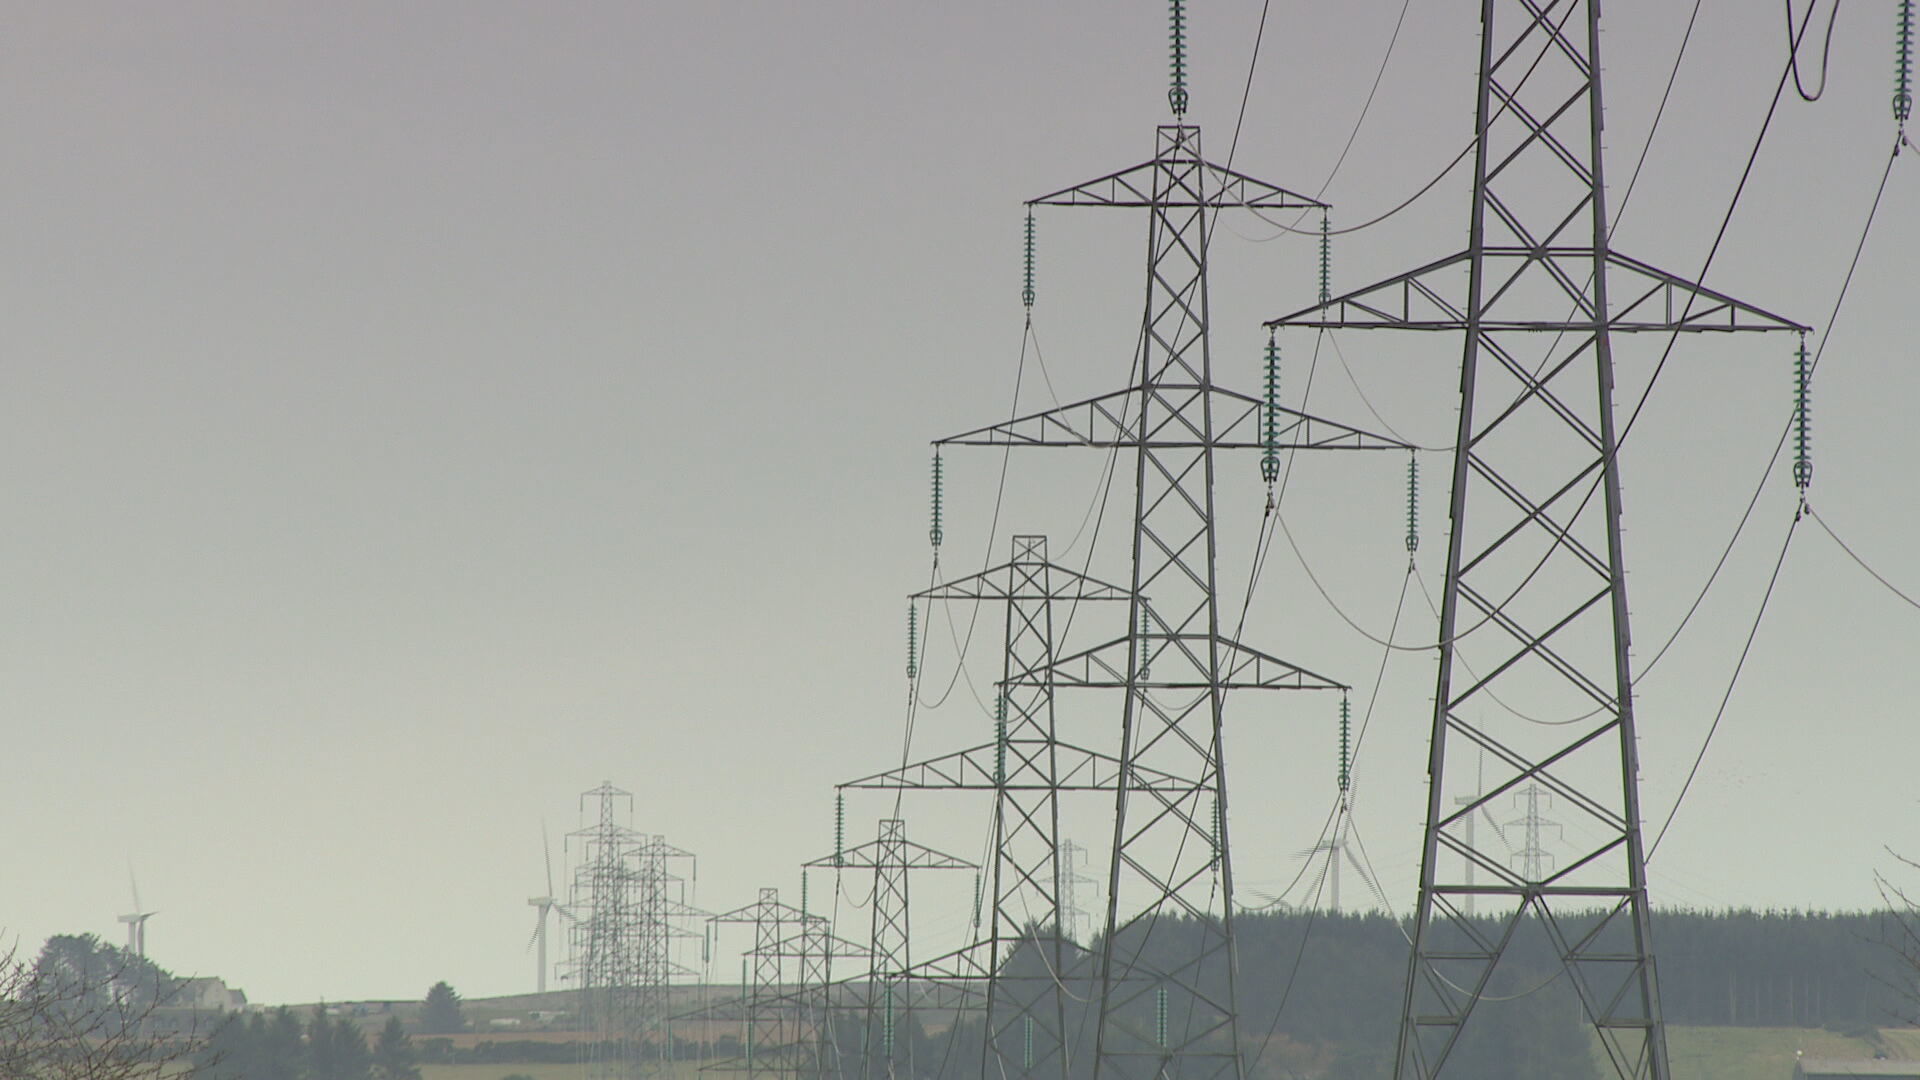 Campaigners have hit out over plans for new power lines 